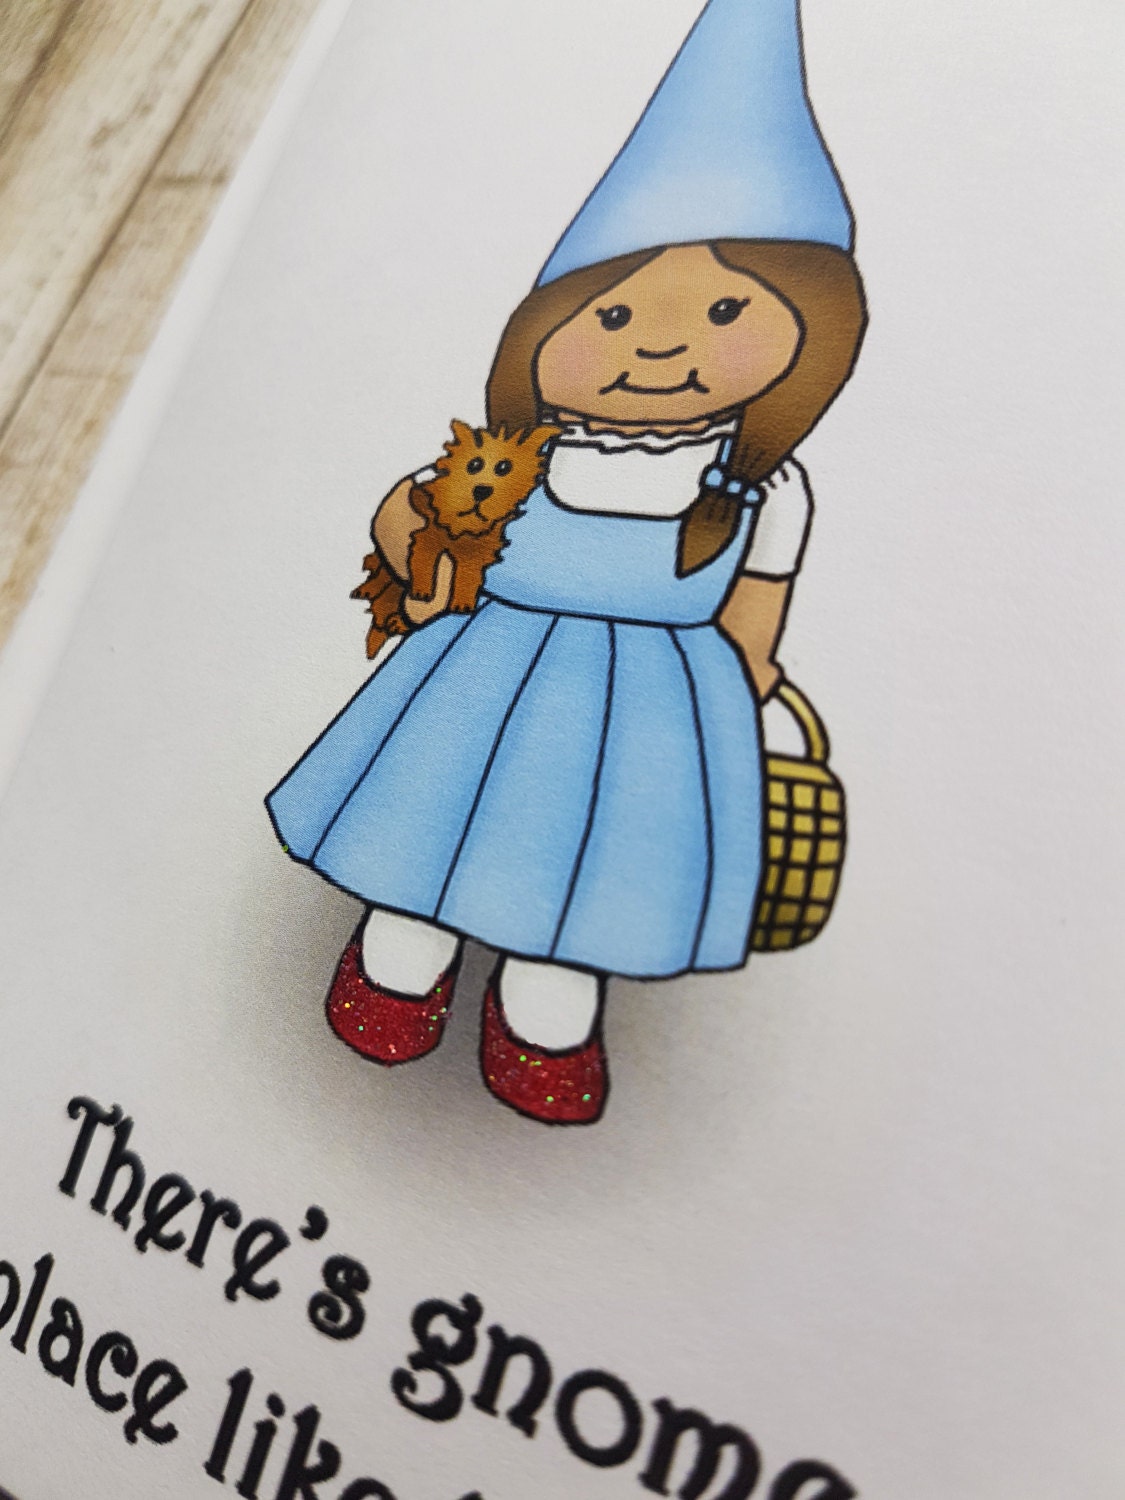 A photo of a greeting card. It has a cartoon gnome on it dressed like Dorothy from the Wizard of Oz holding a little dog. Text reads, There's Gnome Place Like Gnome.